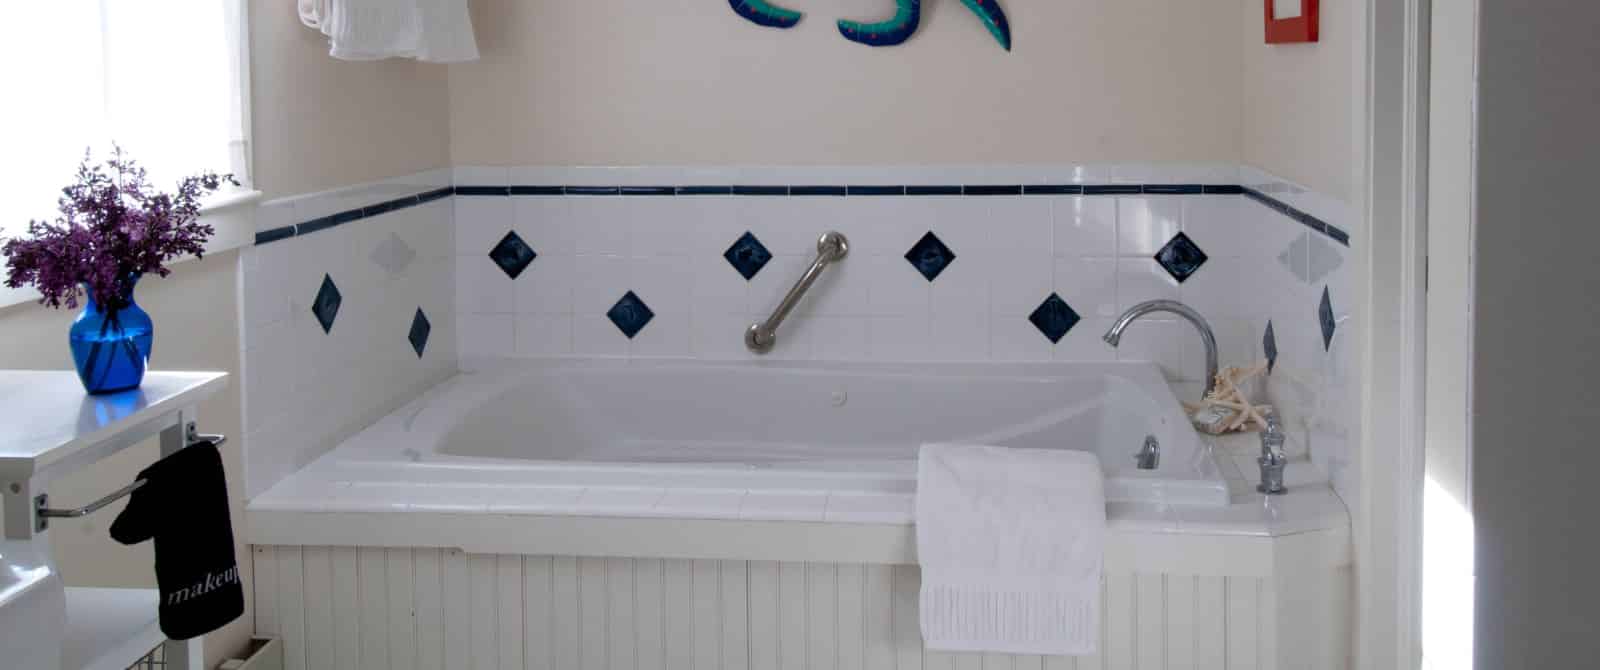 Jetted bathtub with tile surround in a bright white bathroom with blue accents.